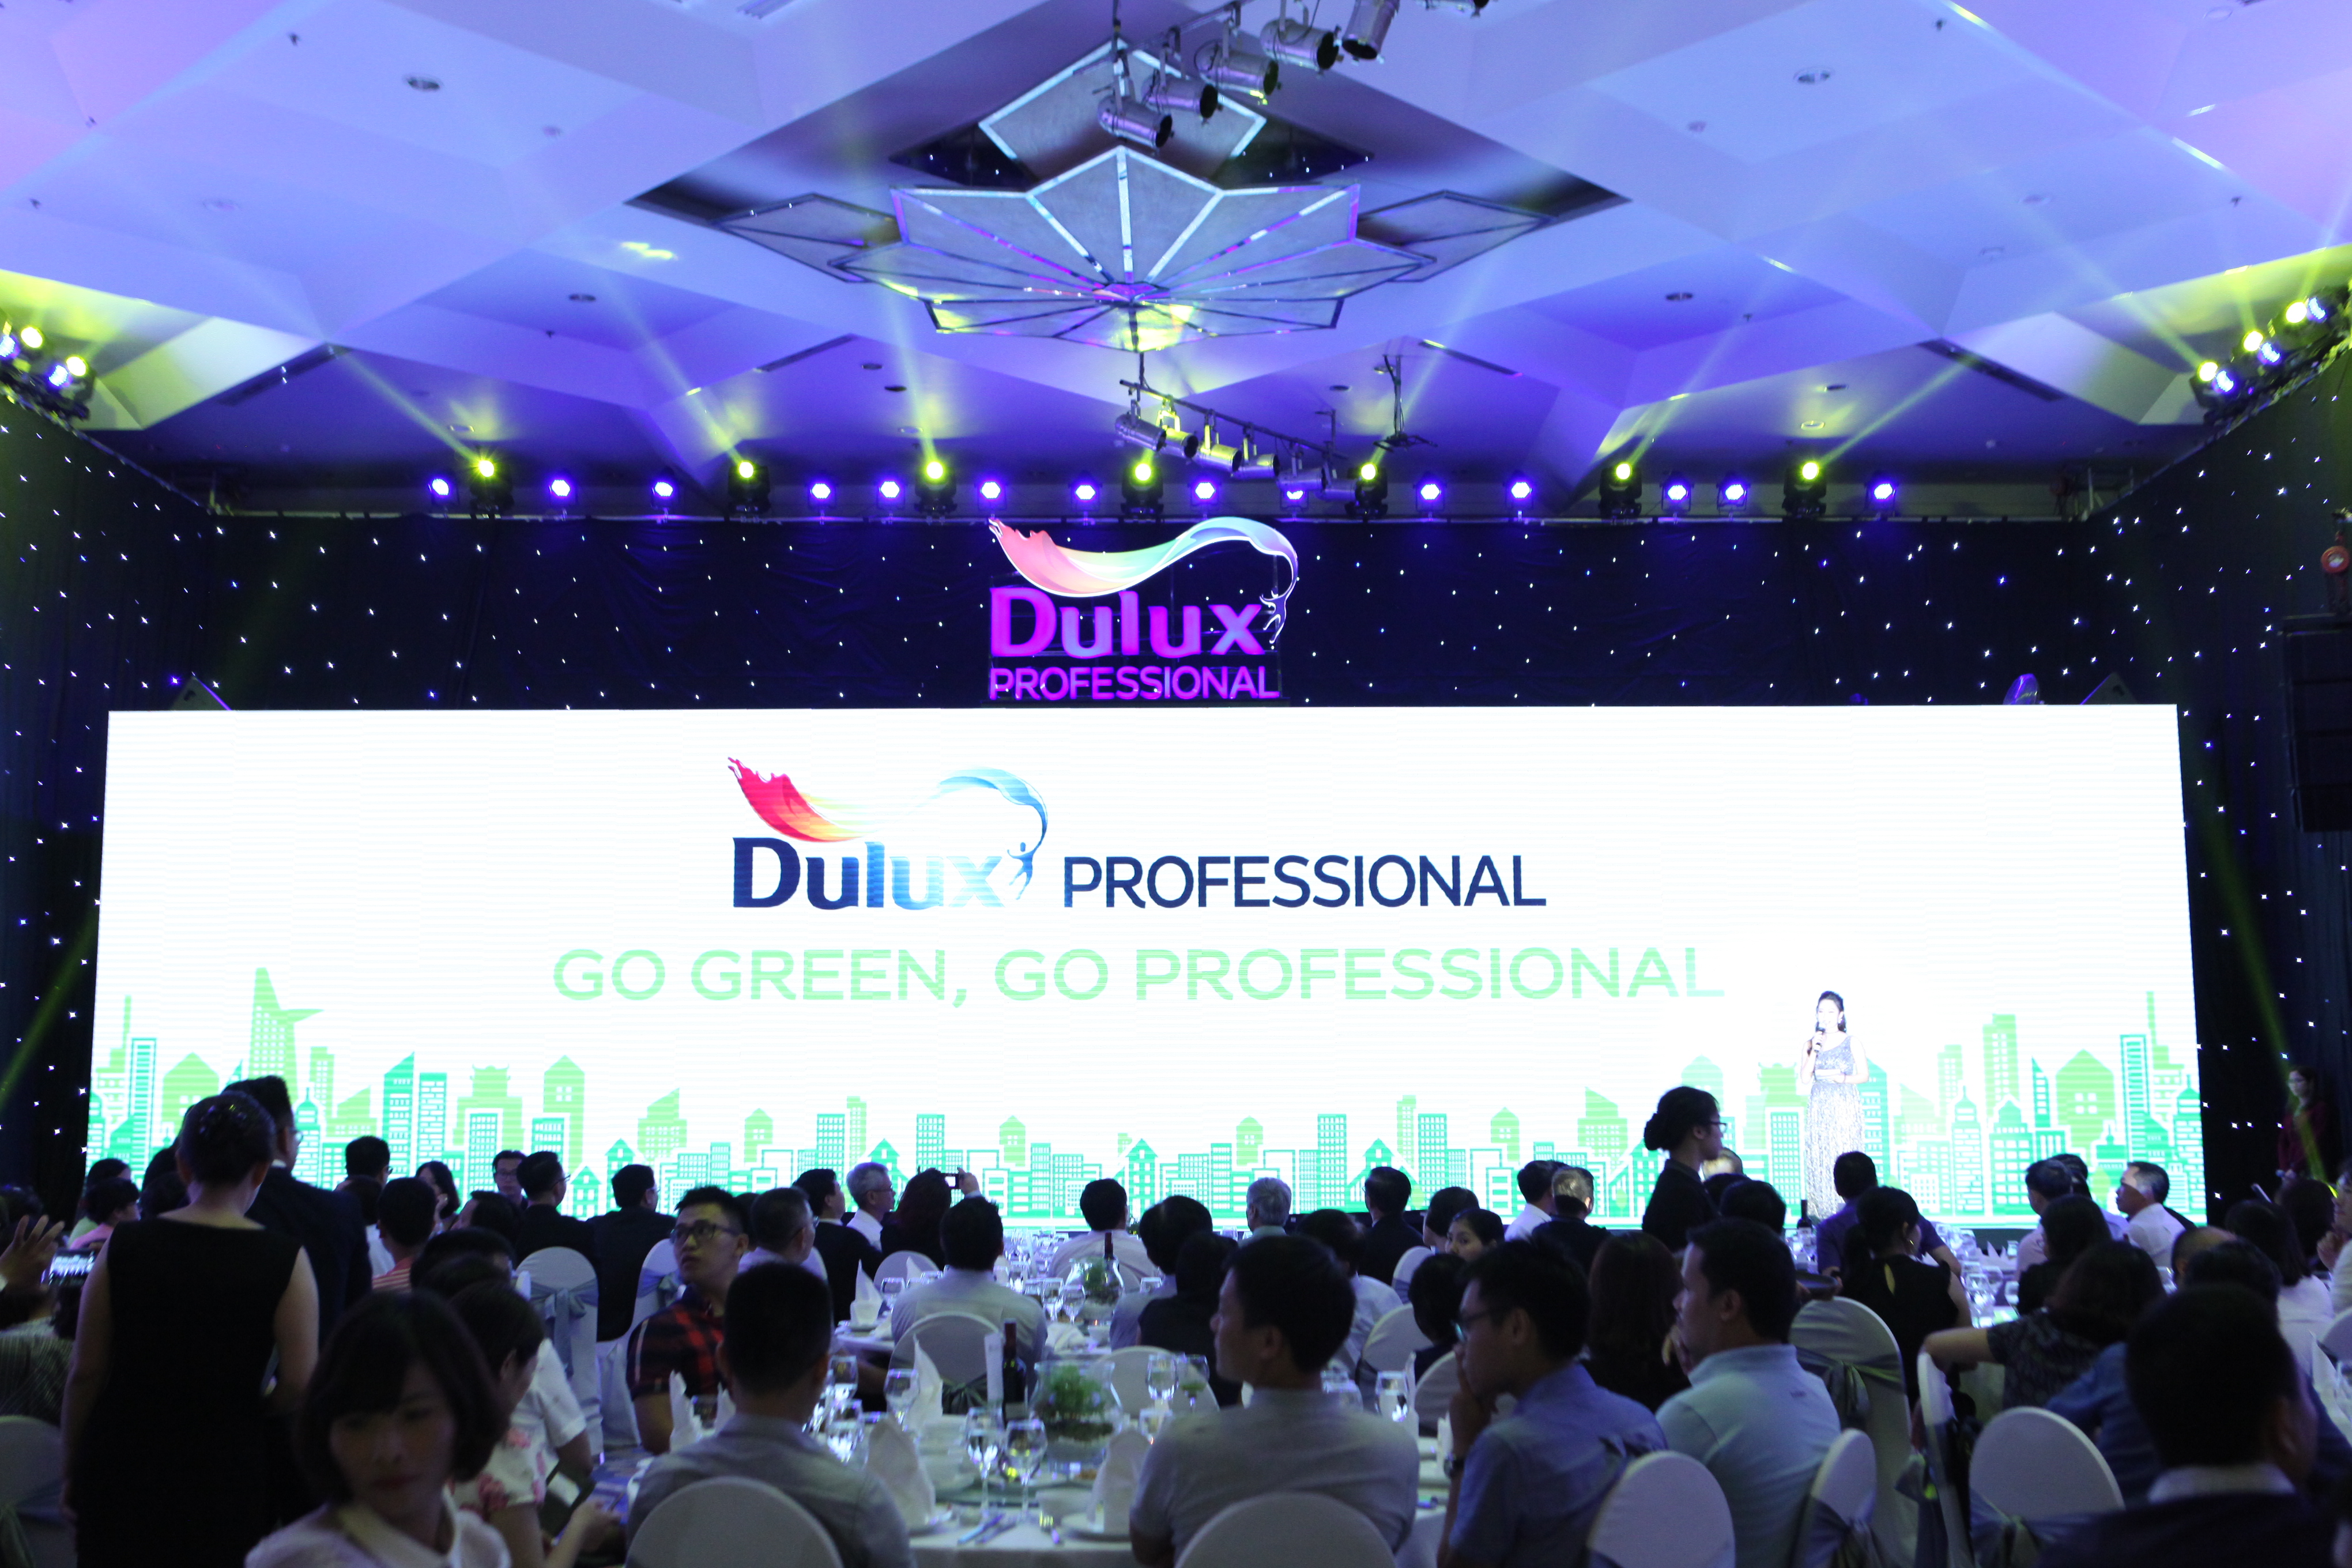 Dulux introduces new solutions in professional line-up